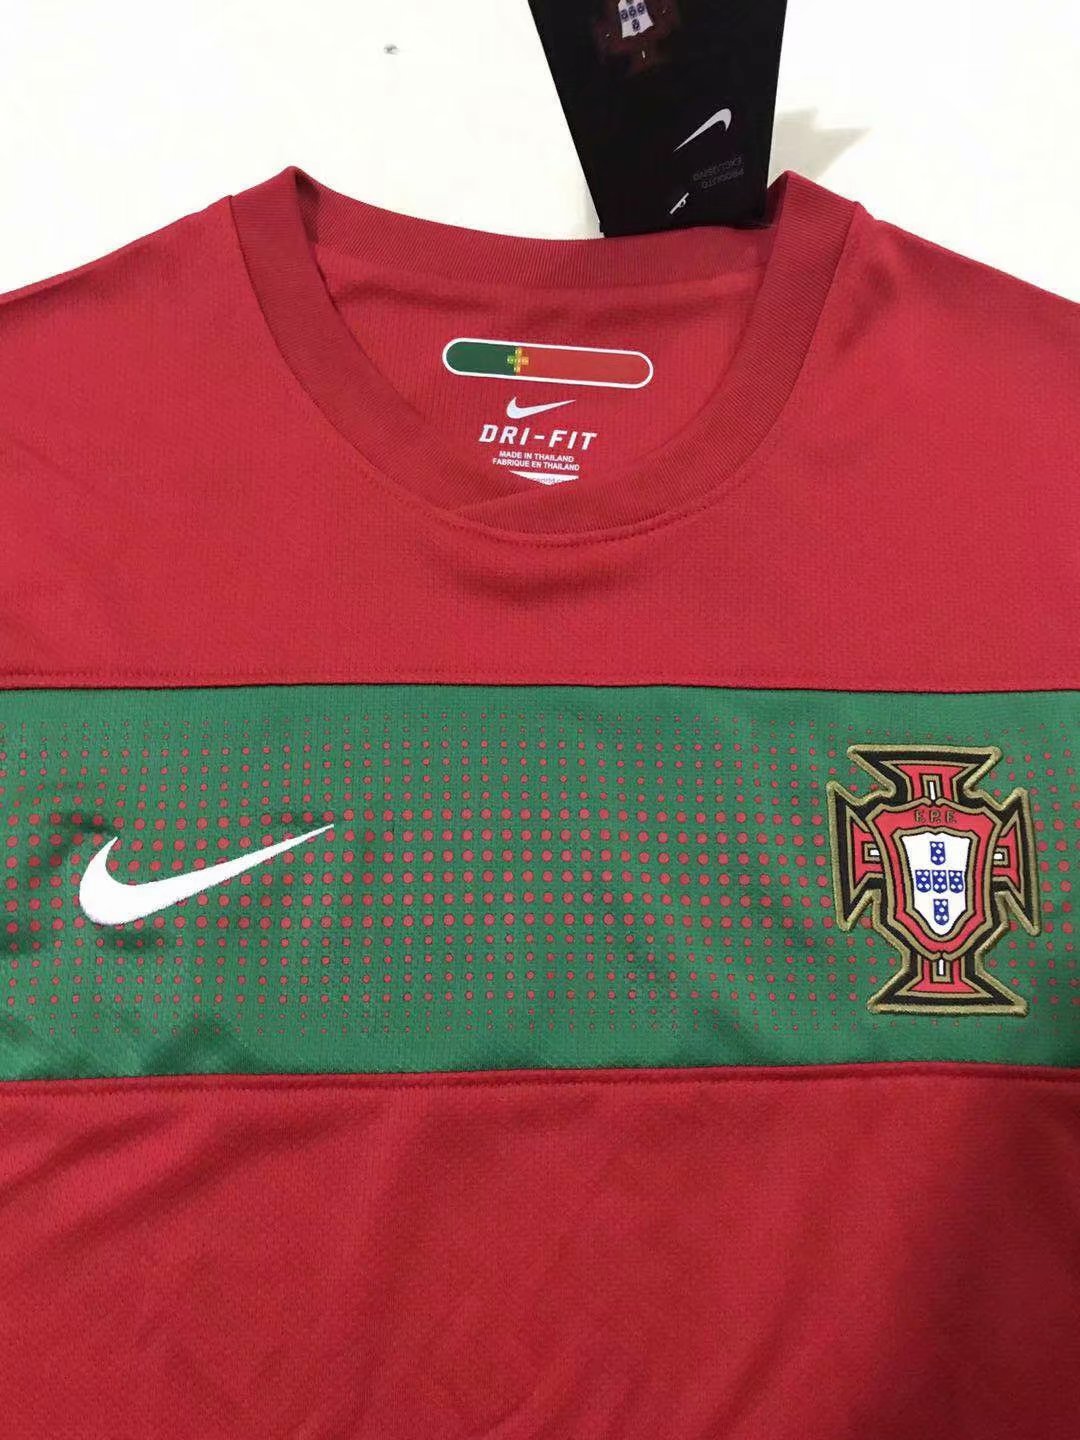 2010 SOUTH AFRICA WORLD CUP PORTUGAL HOME RED RETRO SOCCER SHIRT - Click Image to Close